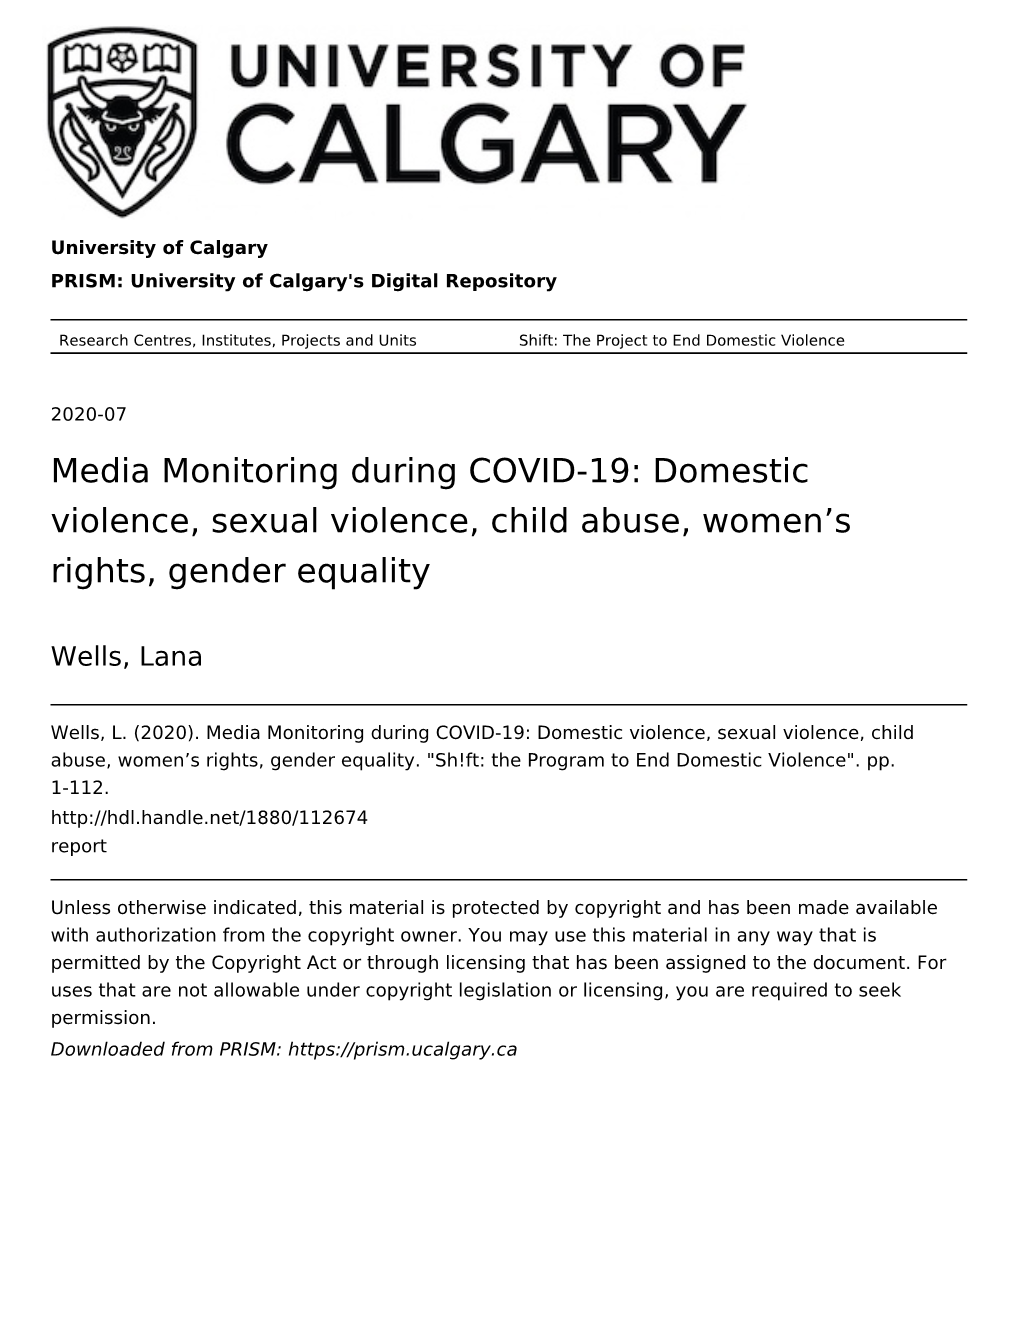 Media Monitoring During COVID-19: Domestic Violence, Sexual Violence, Child Abuse, Women’S Rights, Gender Equality